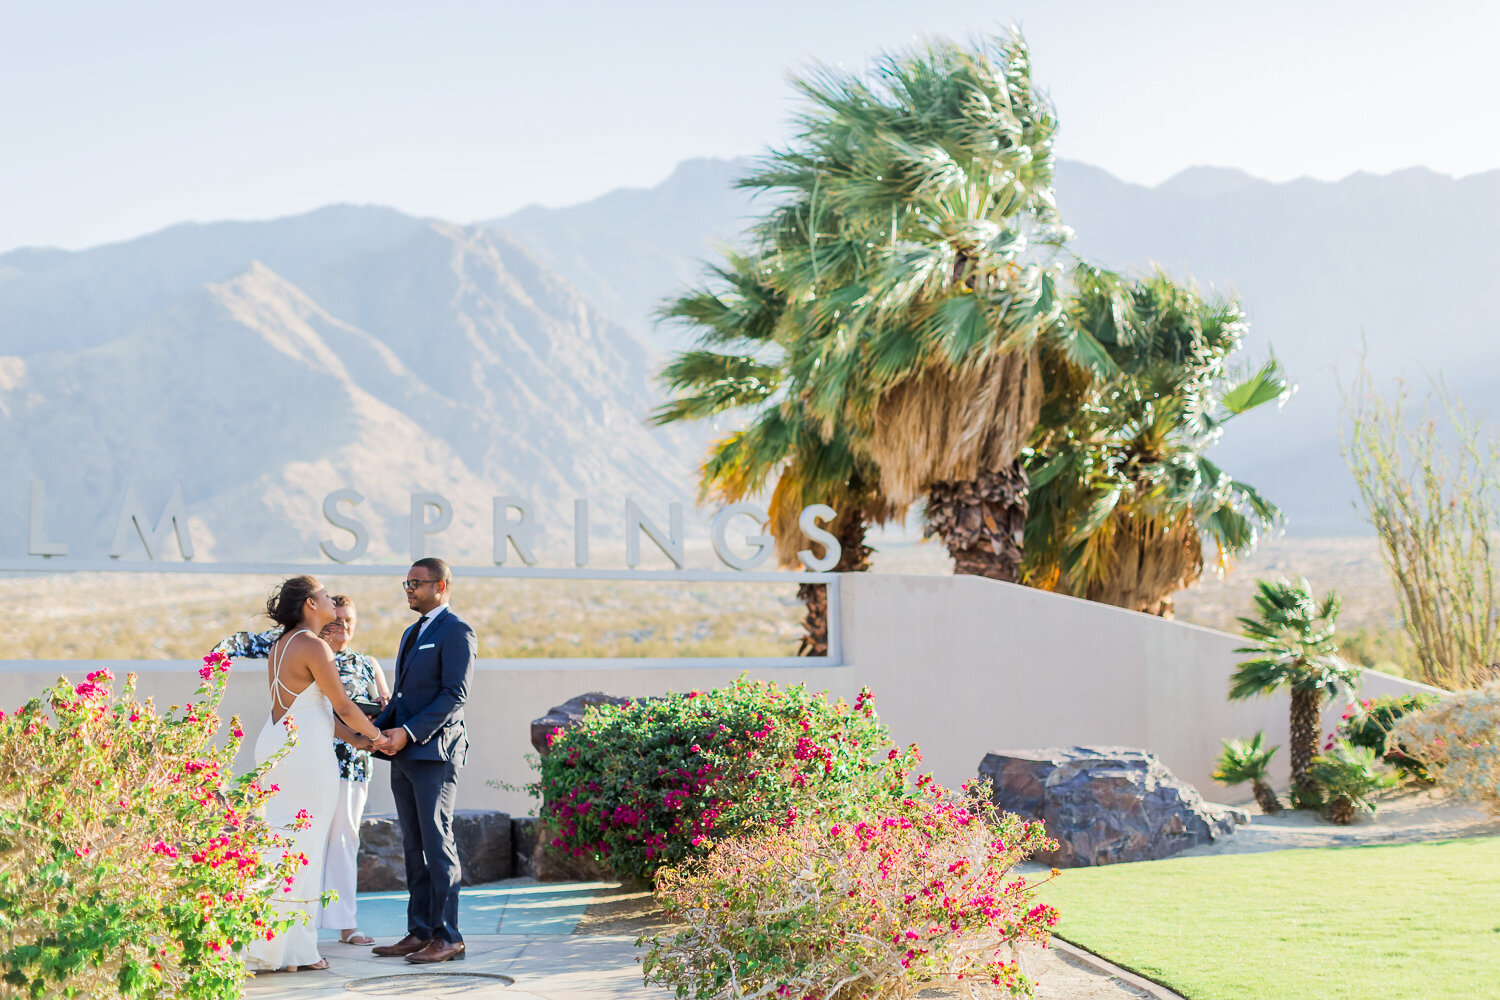 sevelle.elopement.palm.springs.sign.monocle.project-41.jpg